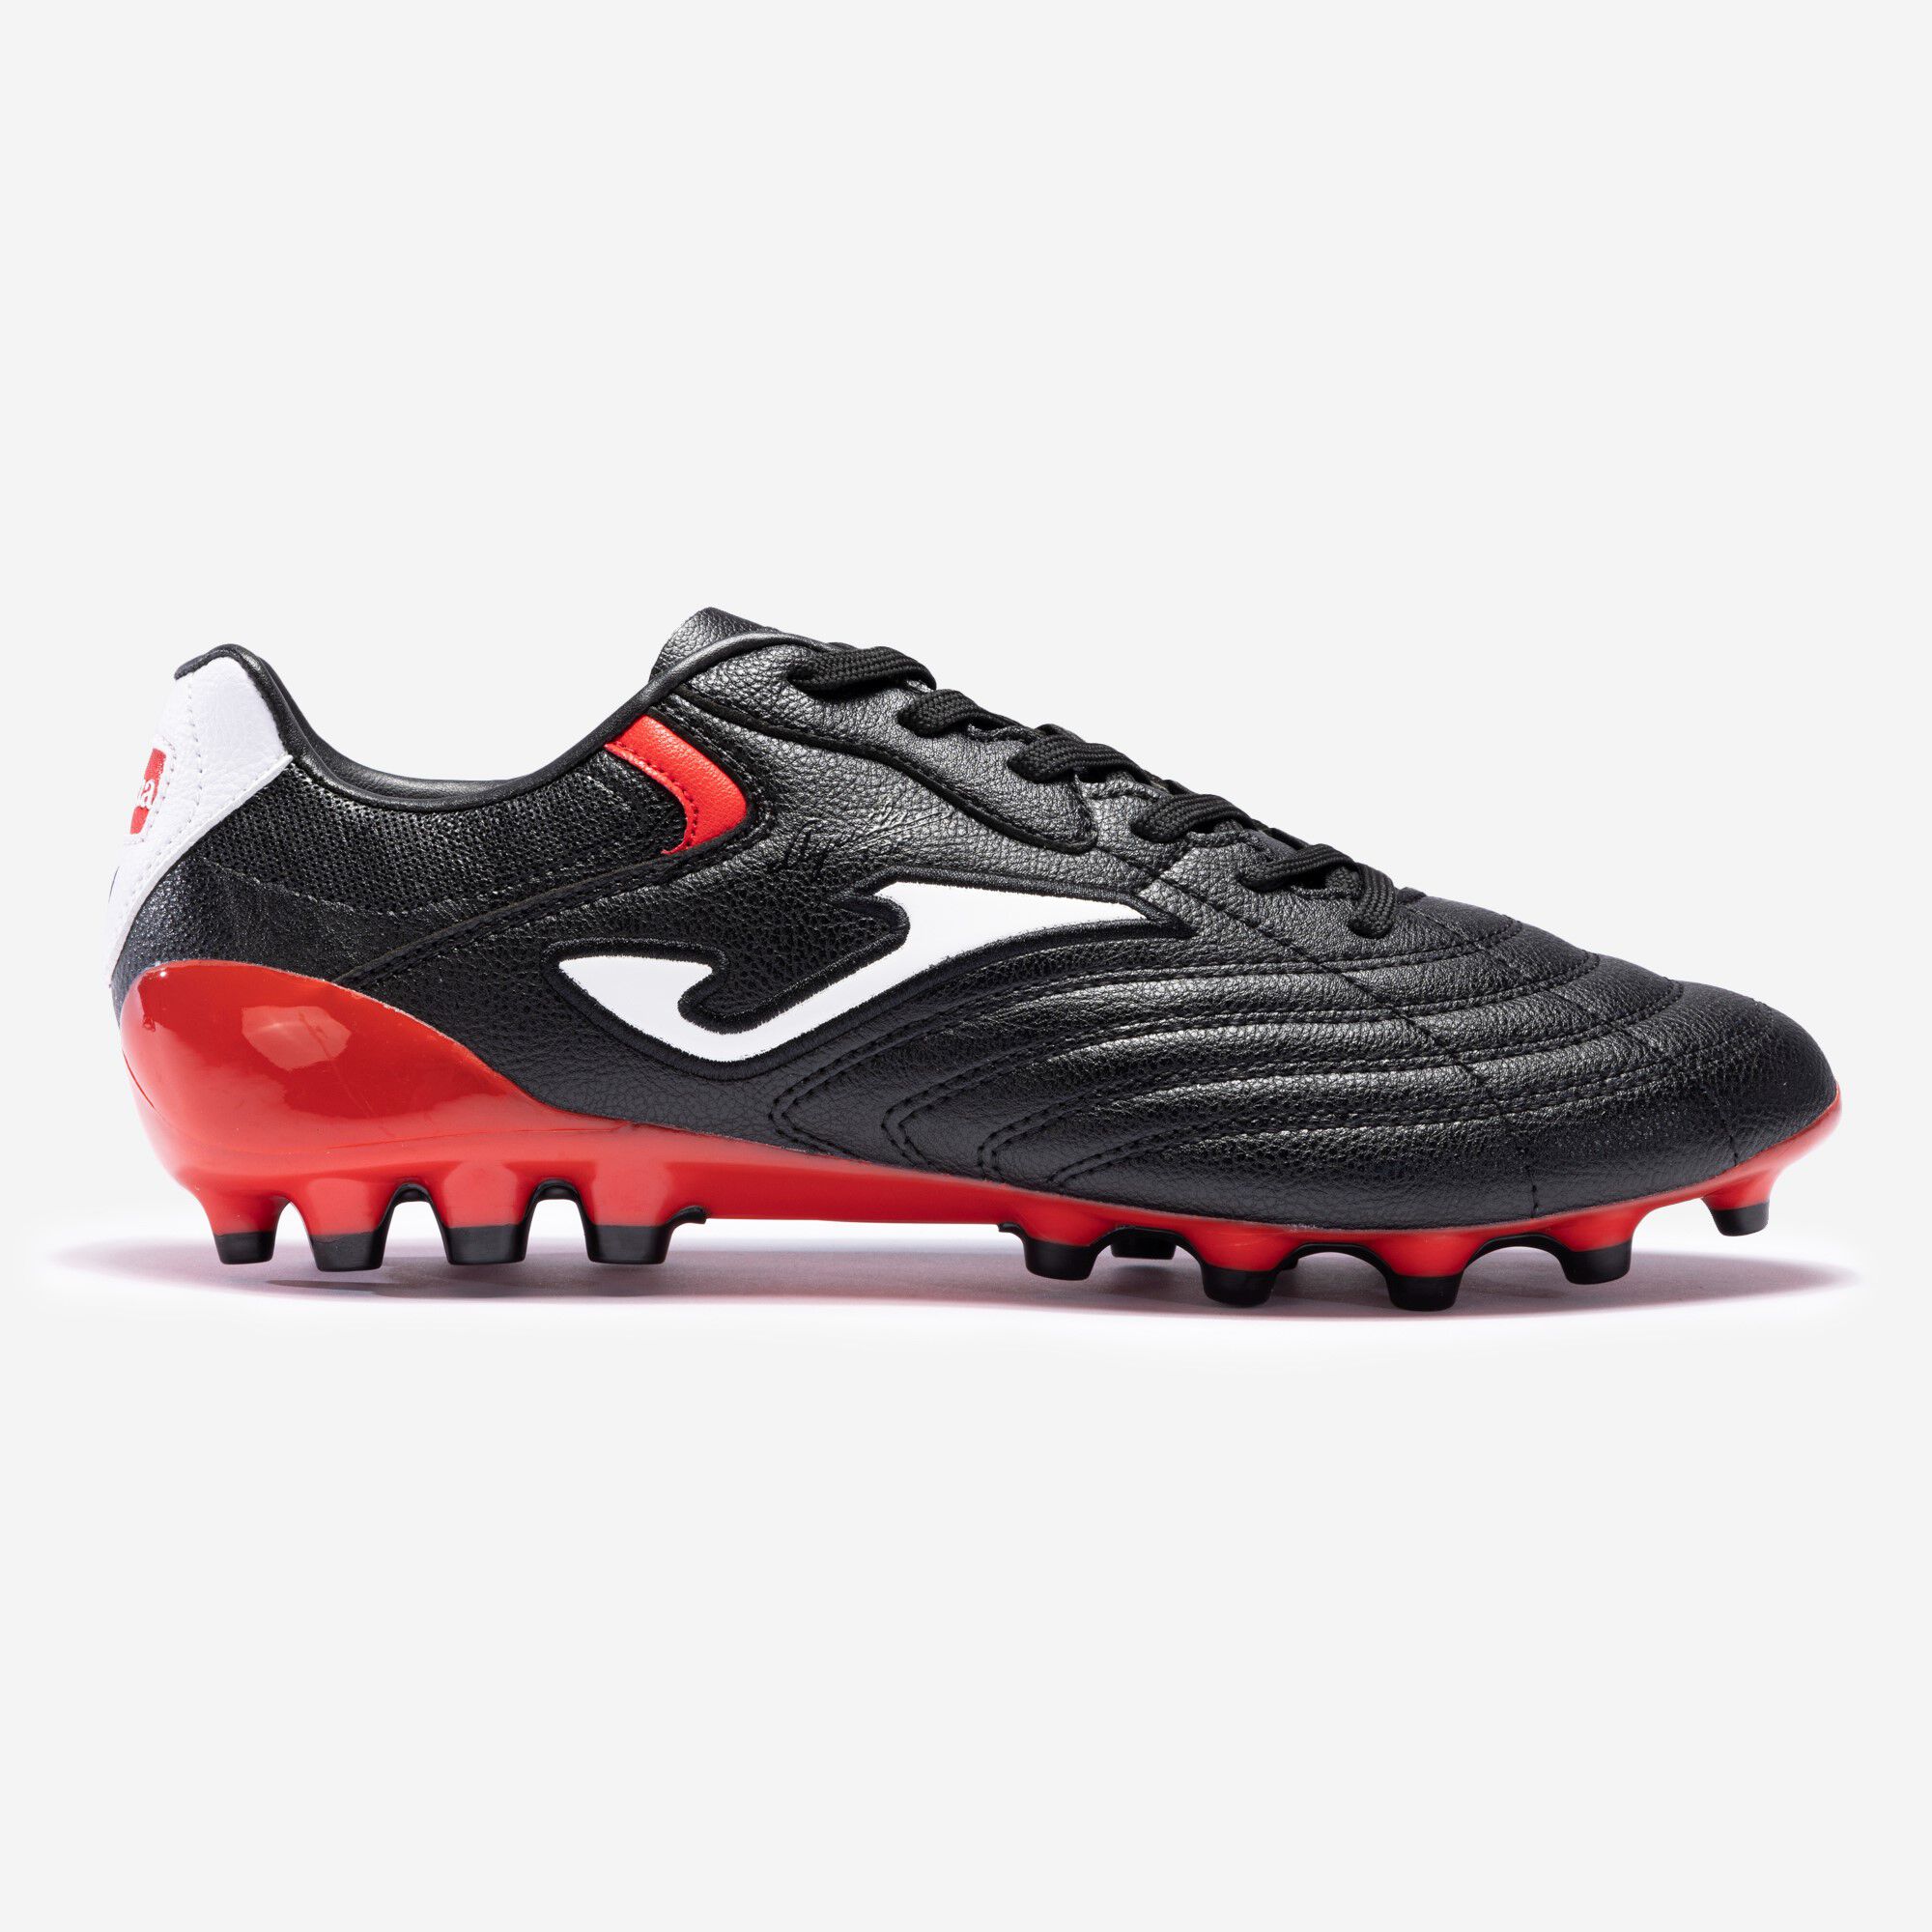 Football boots Aguila Cup 23 artificial grass black red